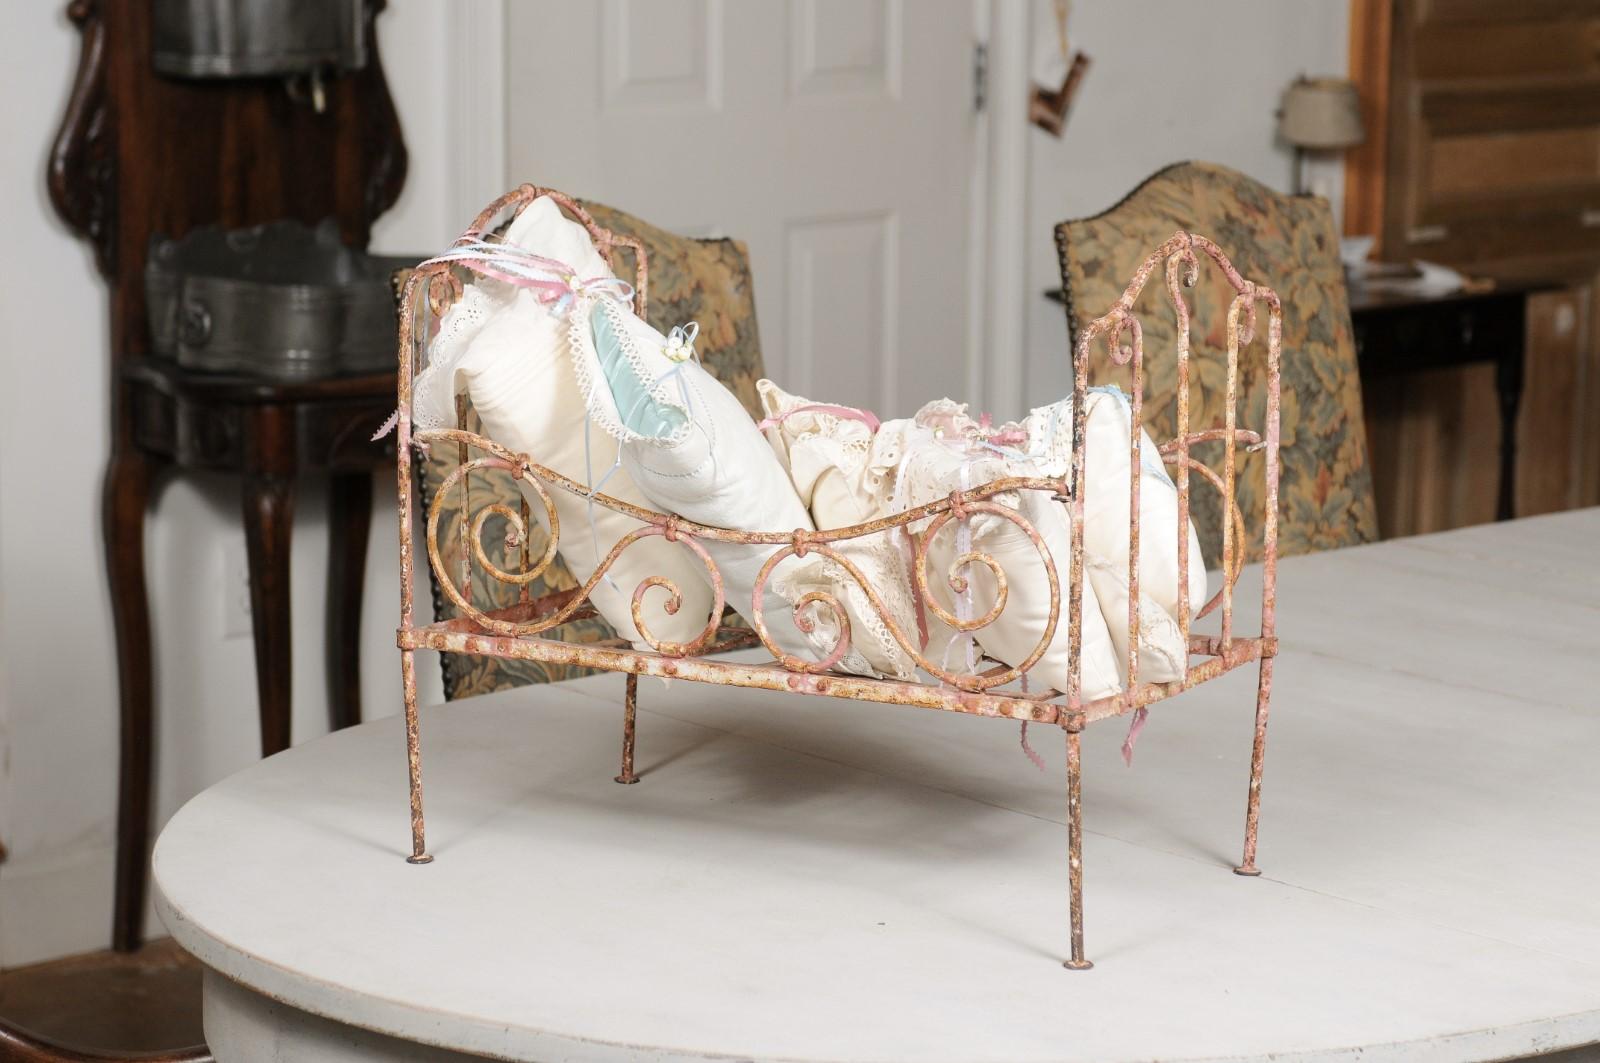 An assortment of vintage French lace pillows in 19th century metal crib. Created in France during the 19th century, this petite crib captures our hearts with its delicate arrangement of vintage lace pillows tied with blue and pink ribbons. Boasting